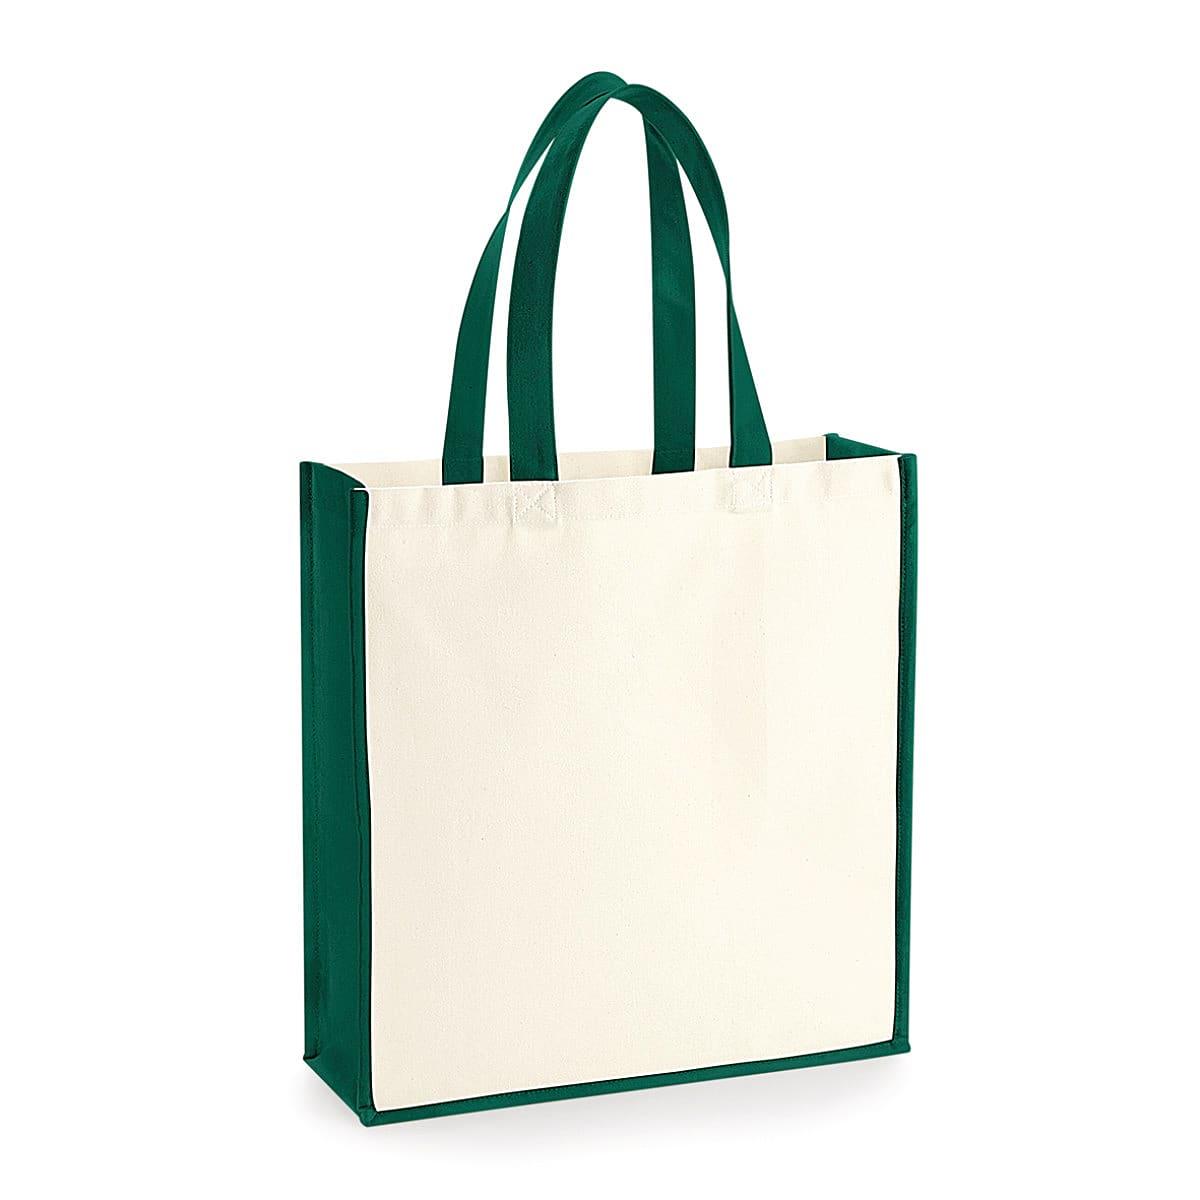 Westford Mill Gallery Canvas Tote in Natural / Bottle Green (Product Code: W600)